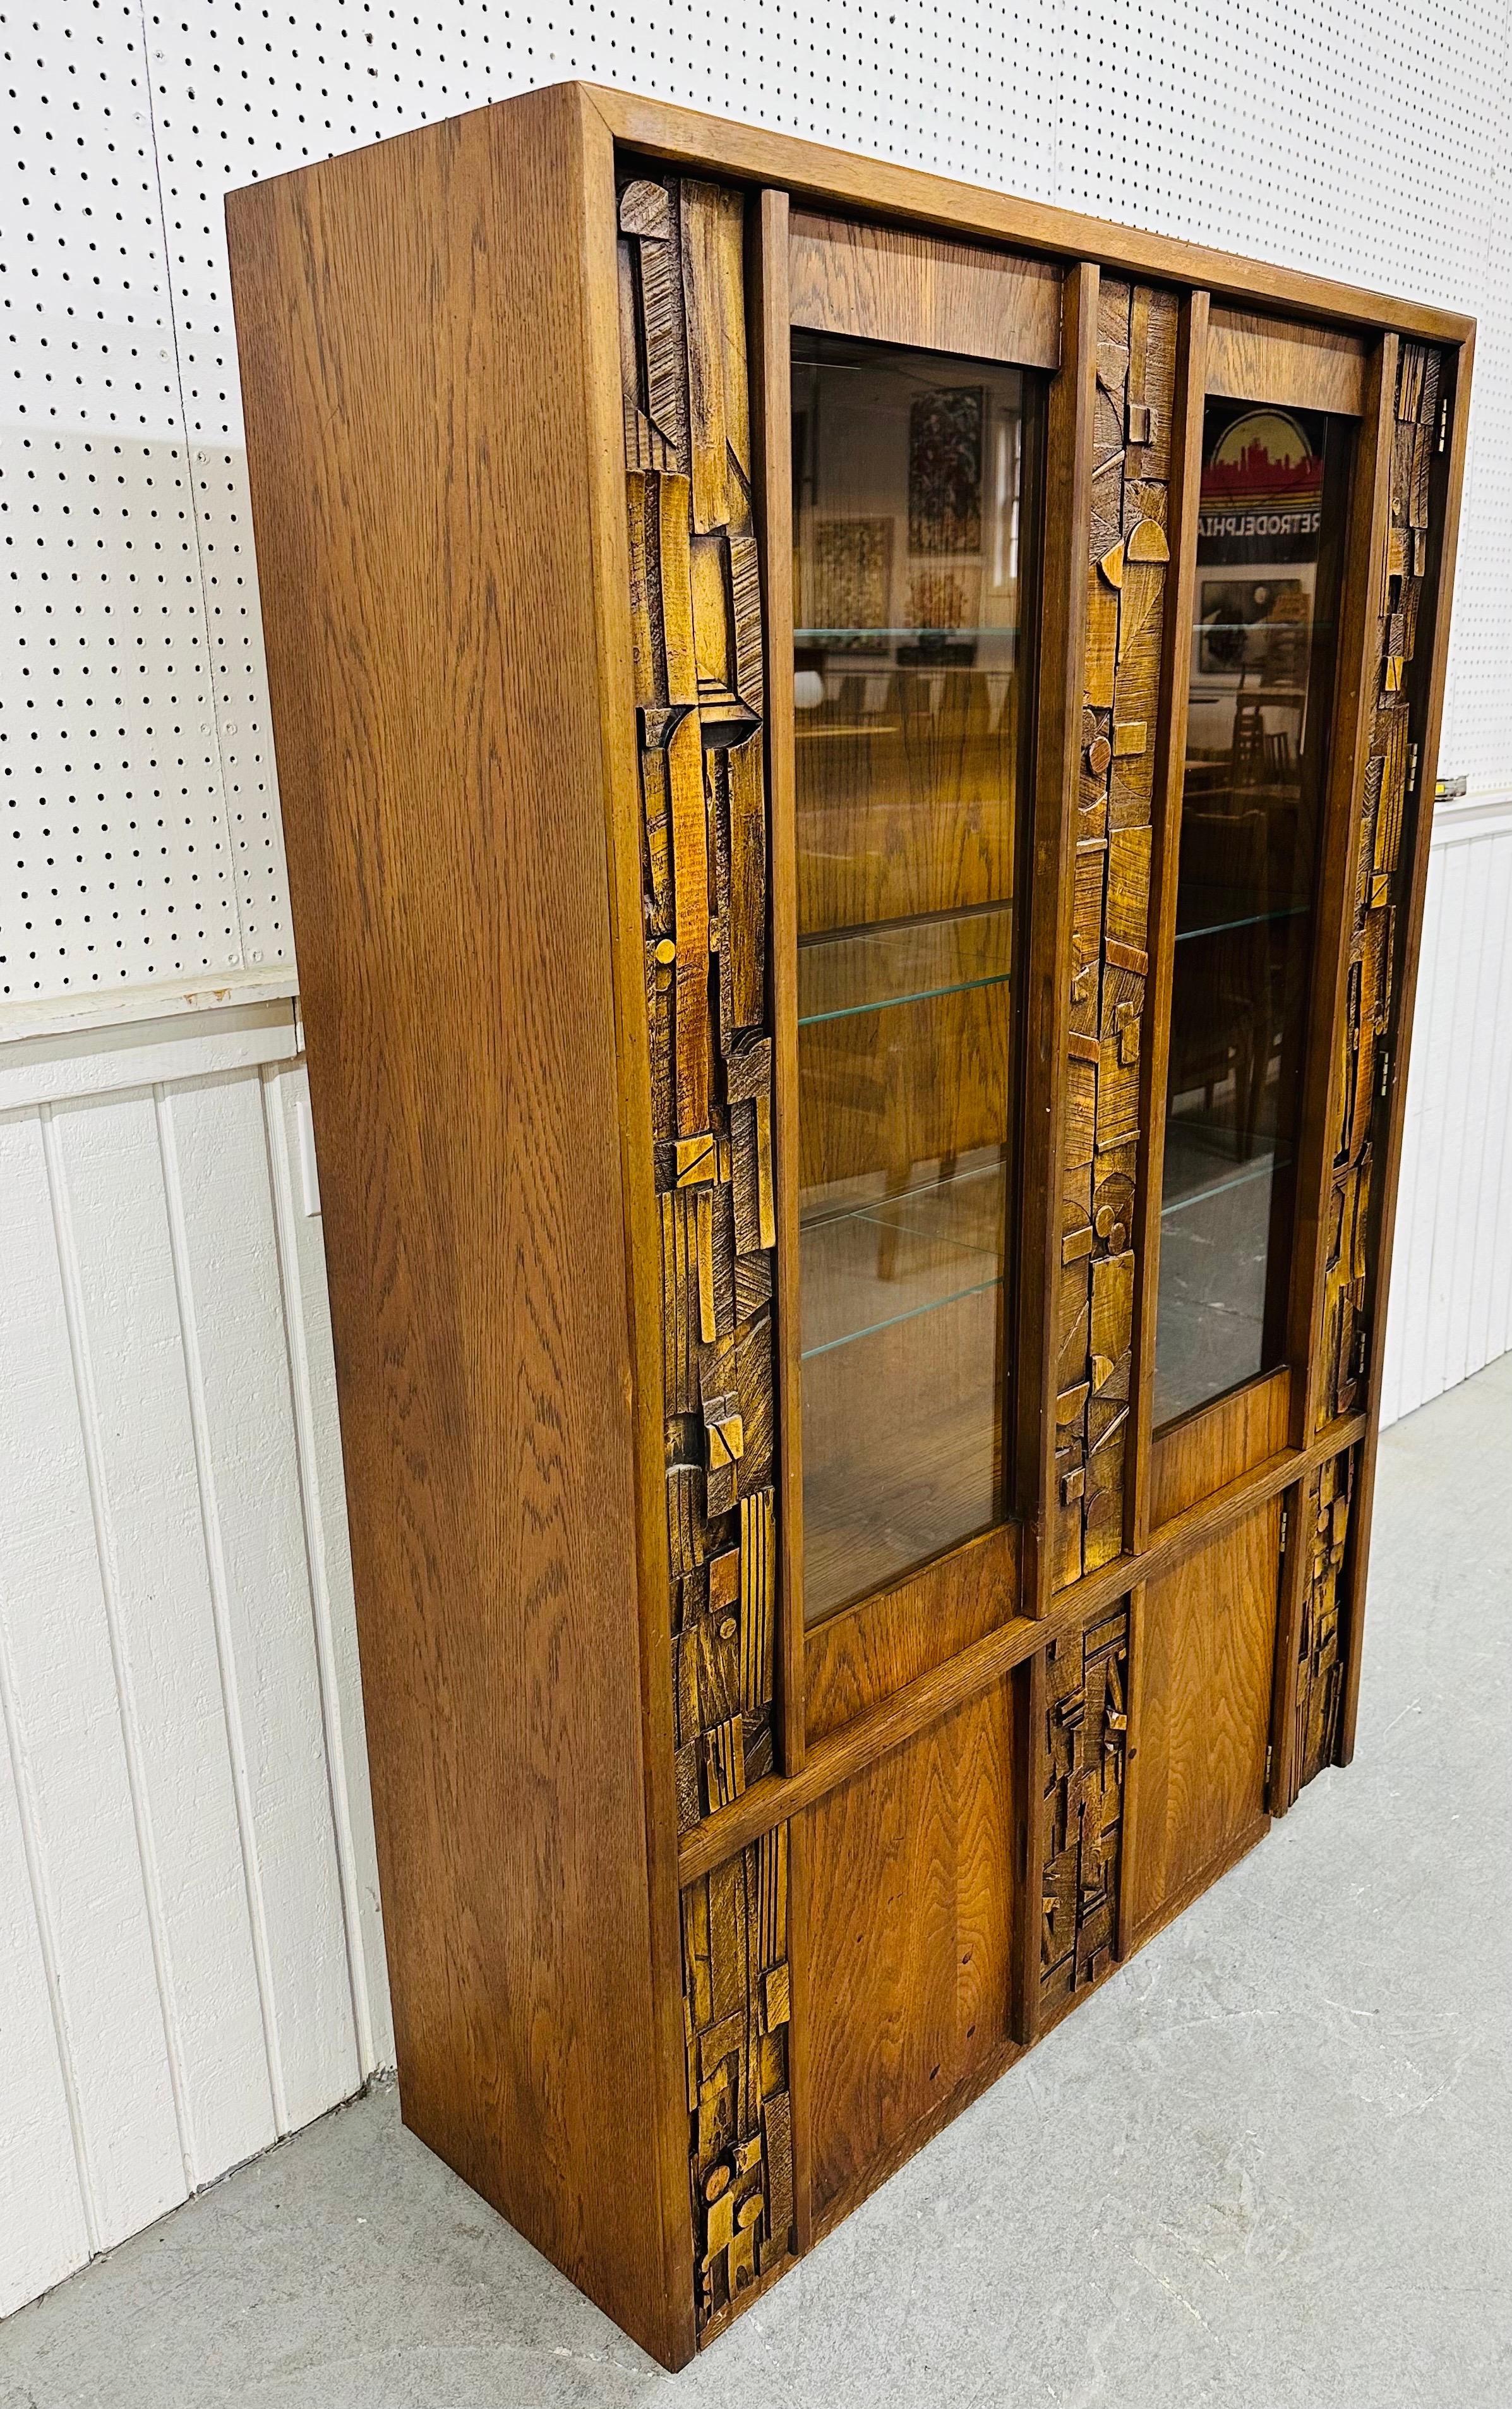 This listing is for a Mid-Century Modern Lane Pueblo Brutalist Display Cabinet. Featuring a straight line brutalist design, two doors that open up to three glass shelves, interior light, two doors at the bottom that open up to storage space, and a